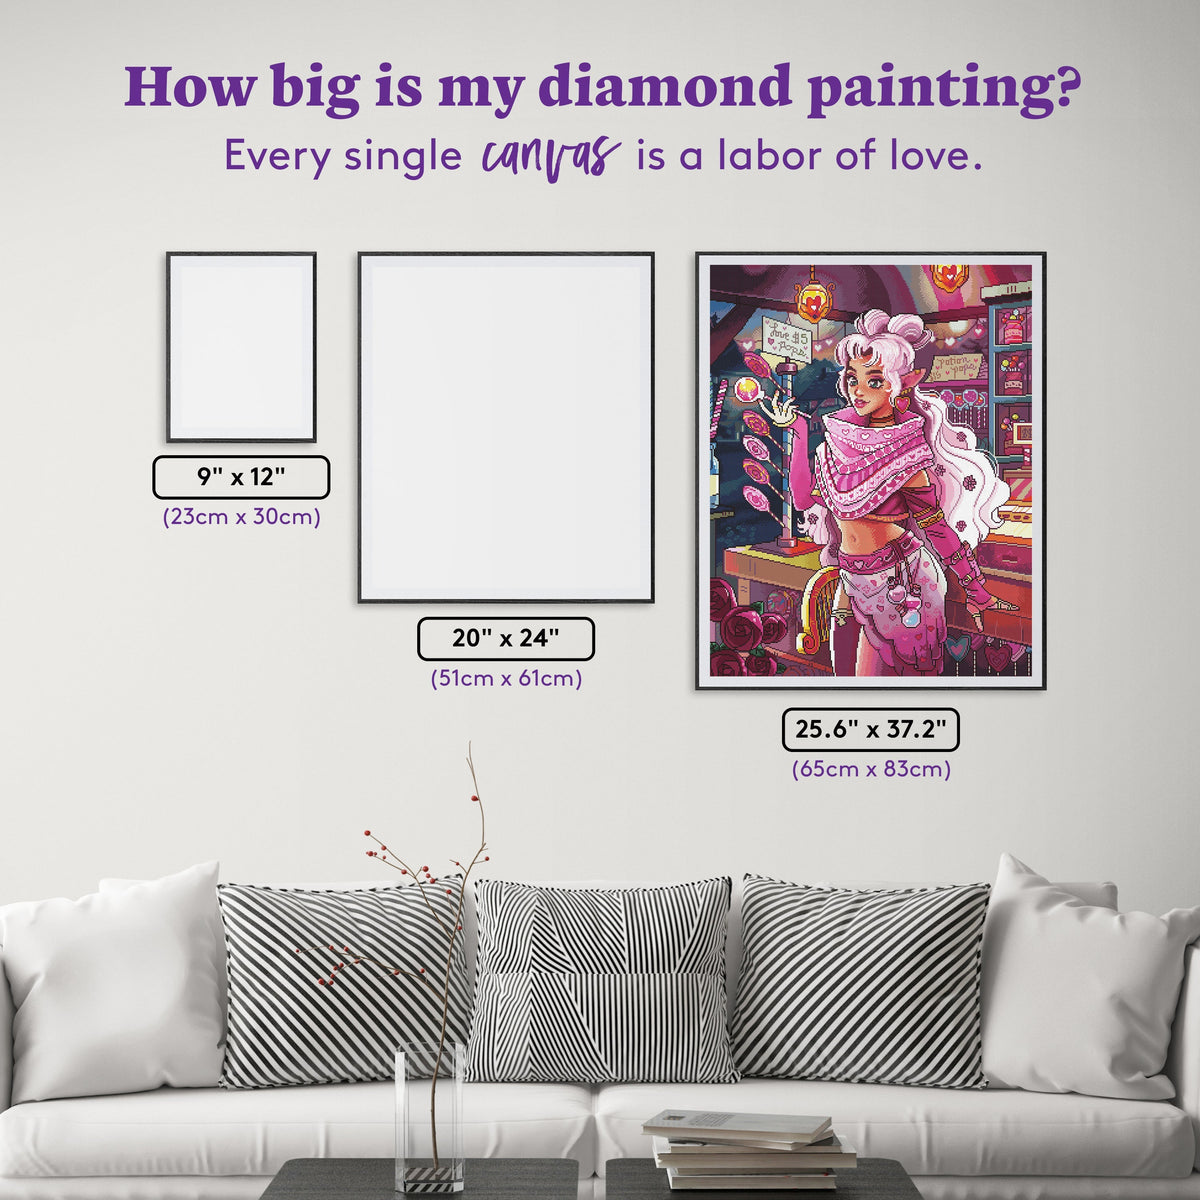 Diamond Painting Love Bard 25.6" x 32.7" (65cm x 83cm) / Square with 97 Colors including 5 ABs and 2 Fairy Dust Diamonds / 86,913